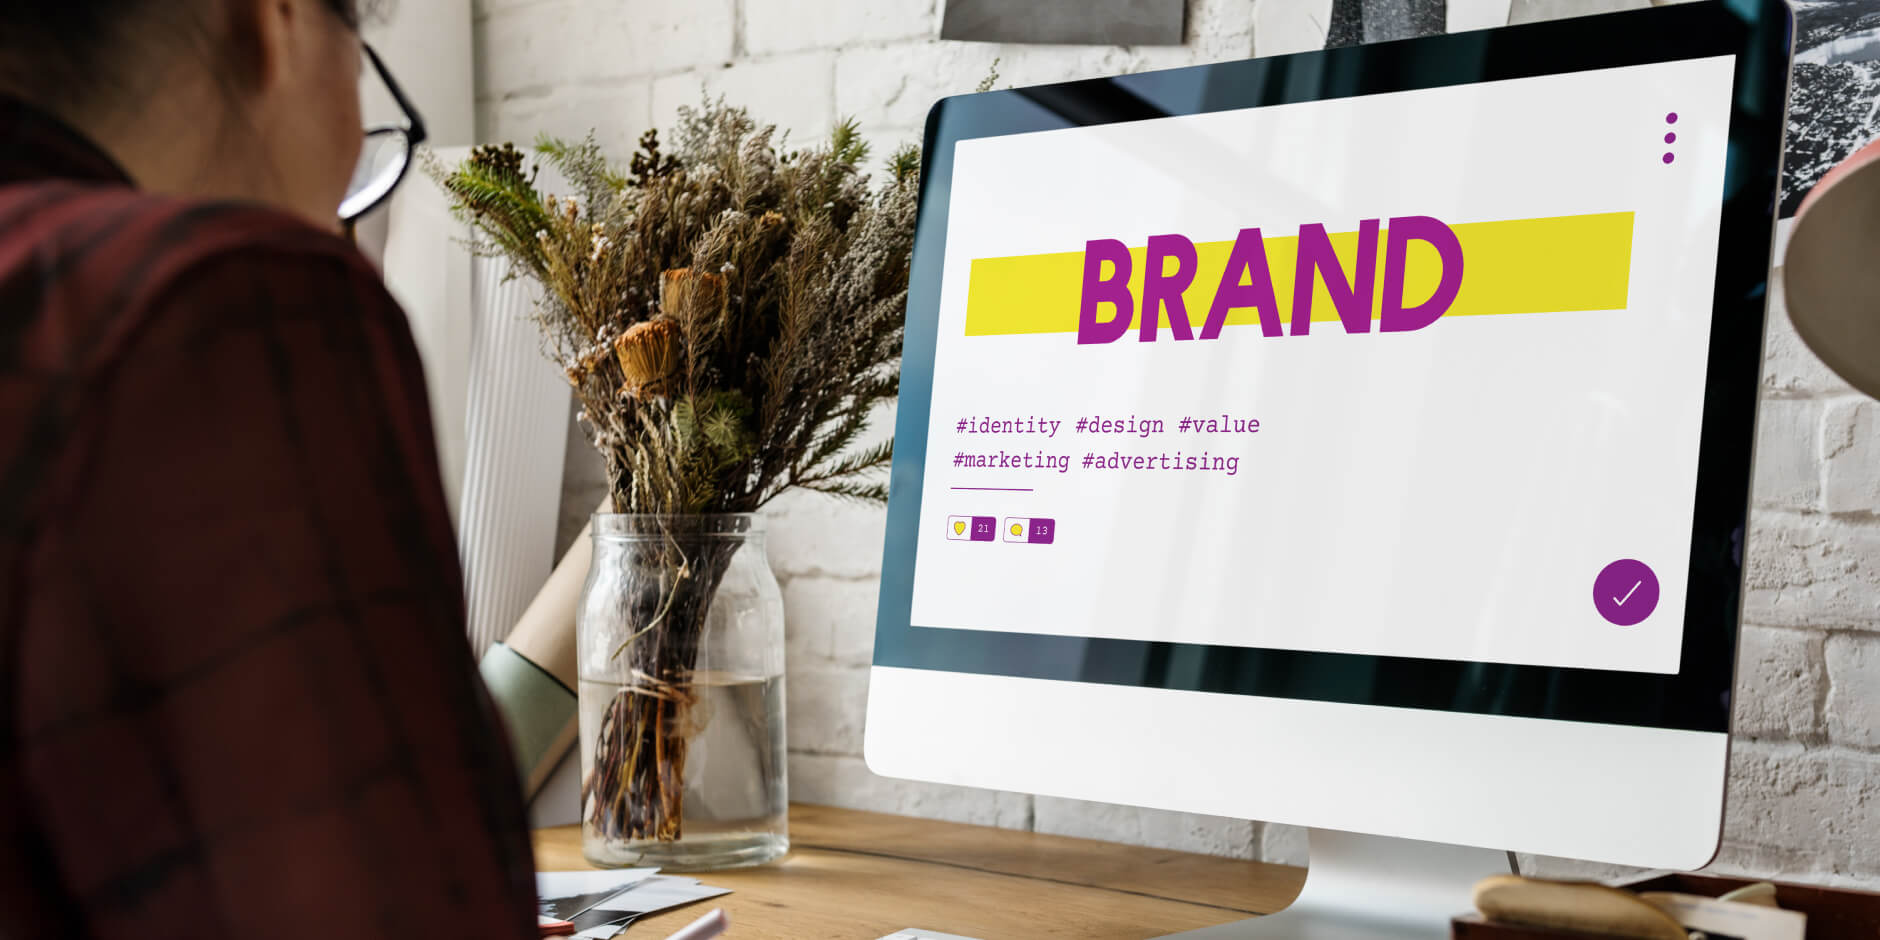 The Entrepreneur's Guide to Building a Successful Brand